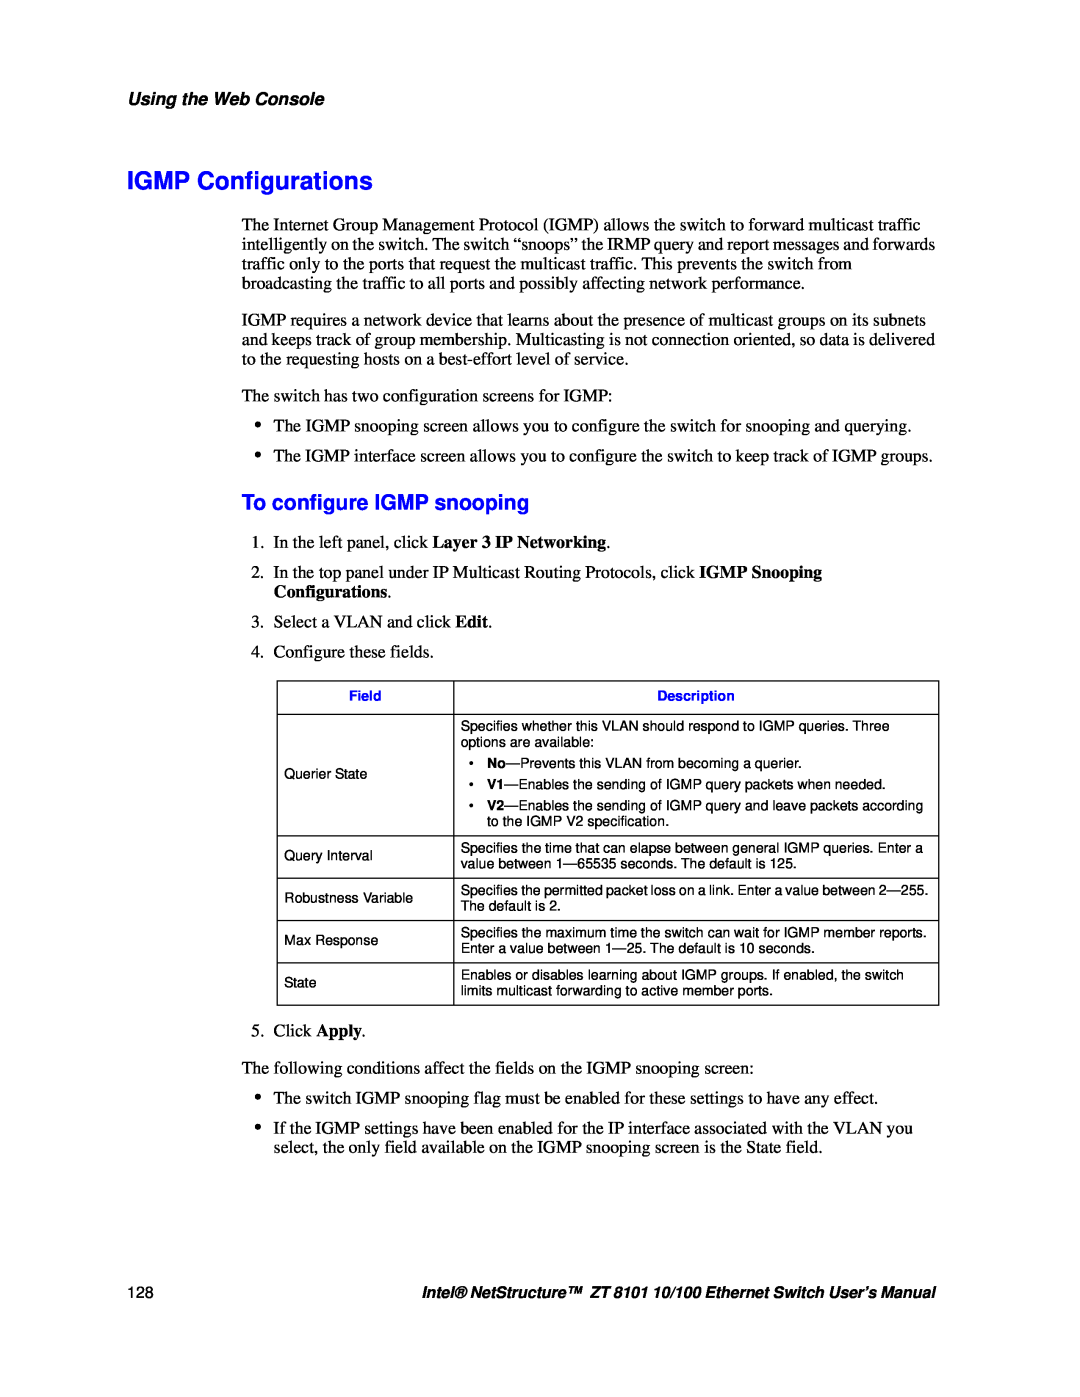 Intel ZT 8101 10/100 user manual IGMP Configurations, To configure IGMP snooping, Using the Web Console 